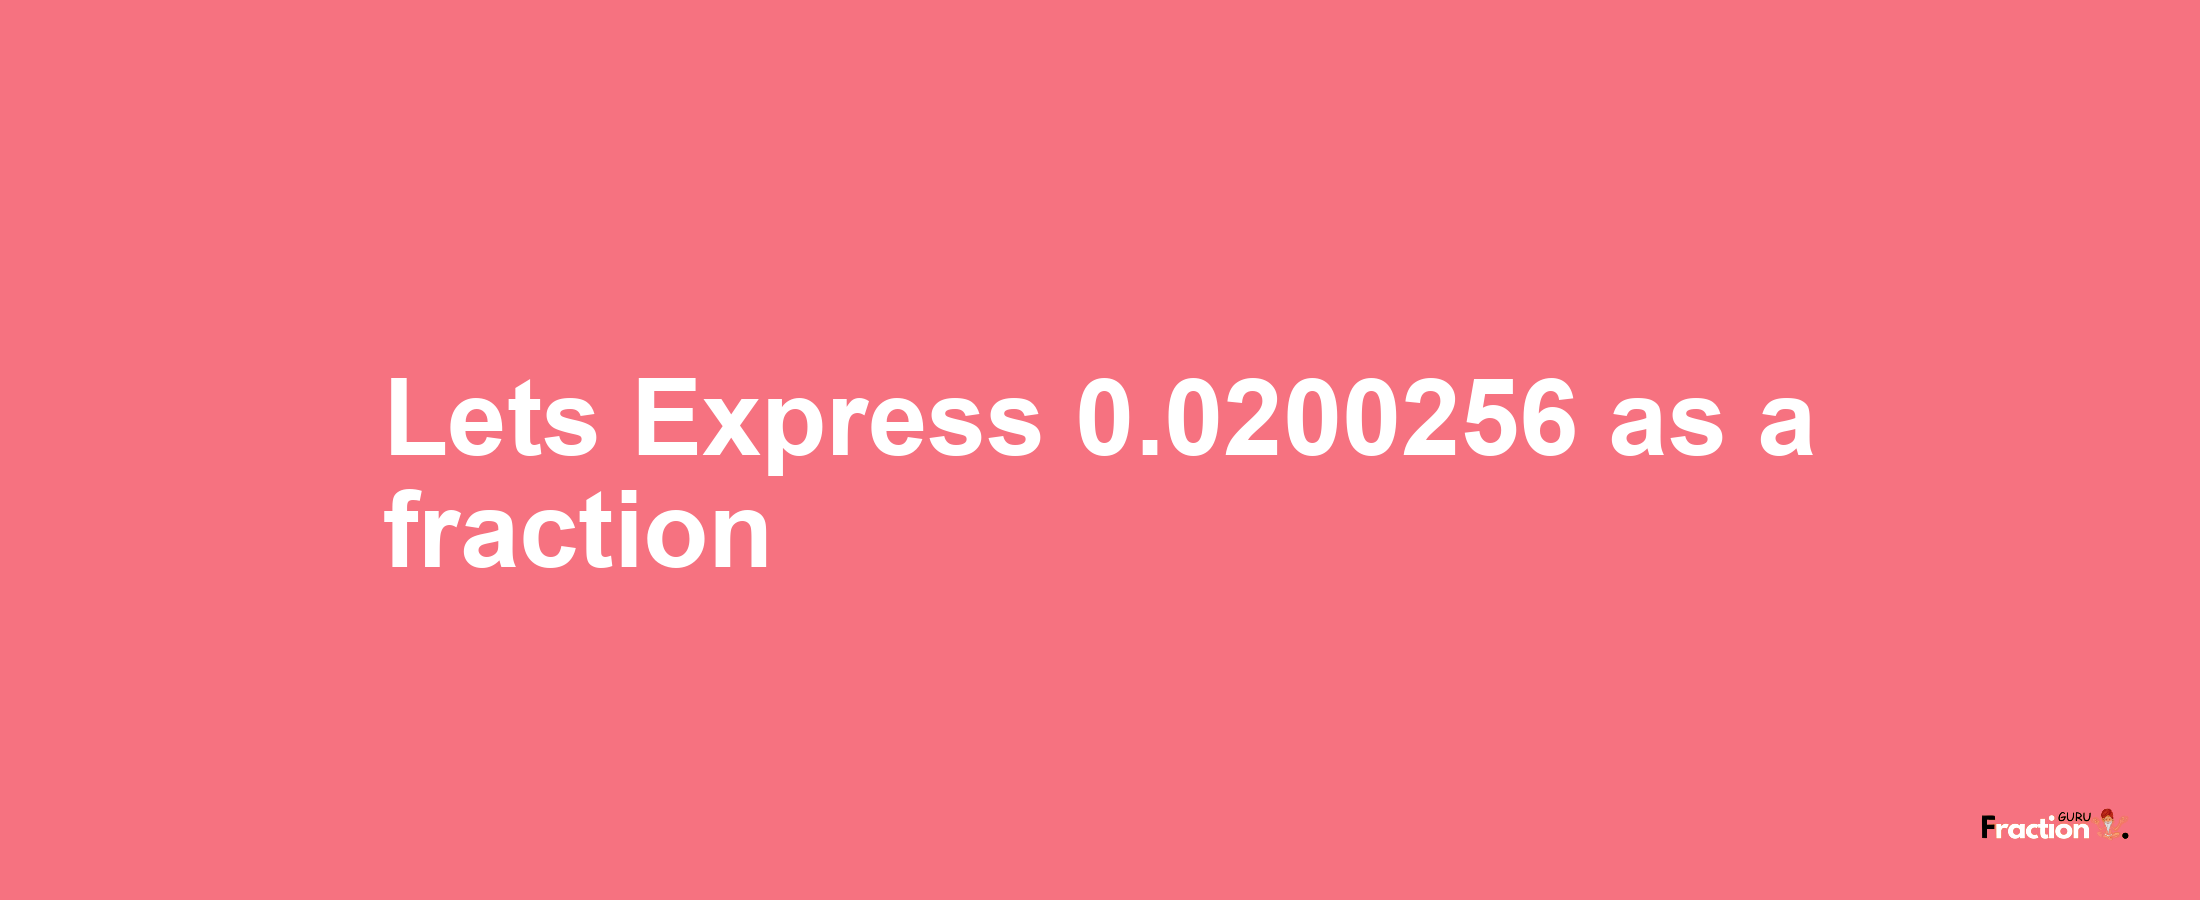 Lets Express 0.0200256 as afraction